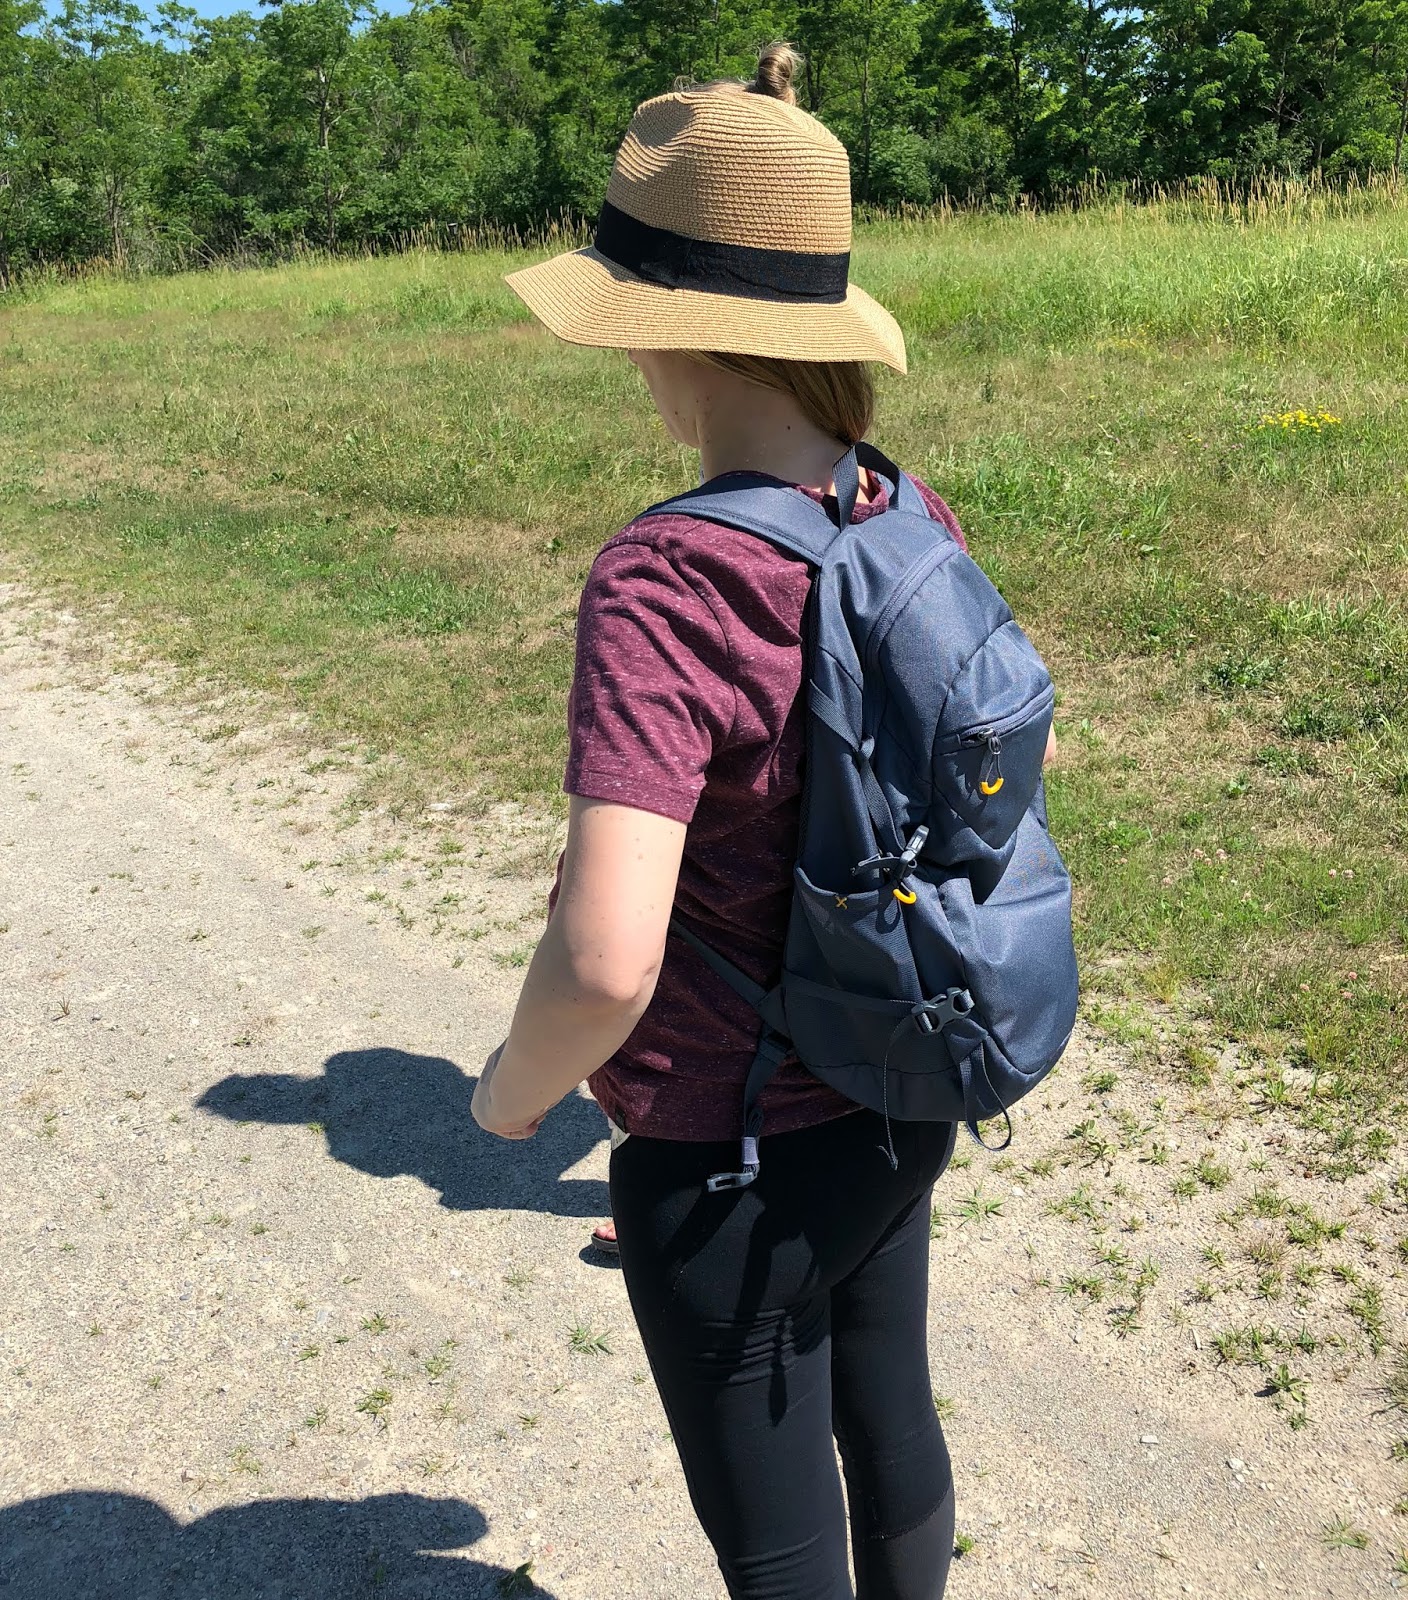 Tips for Hiking While Pregnant